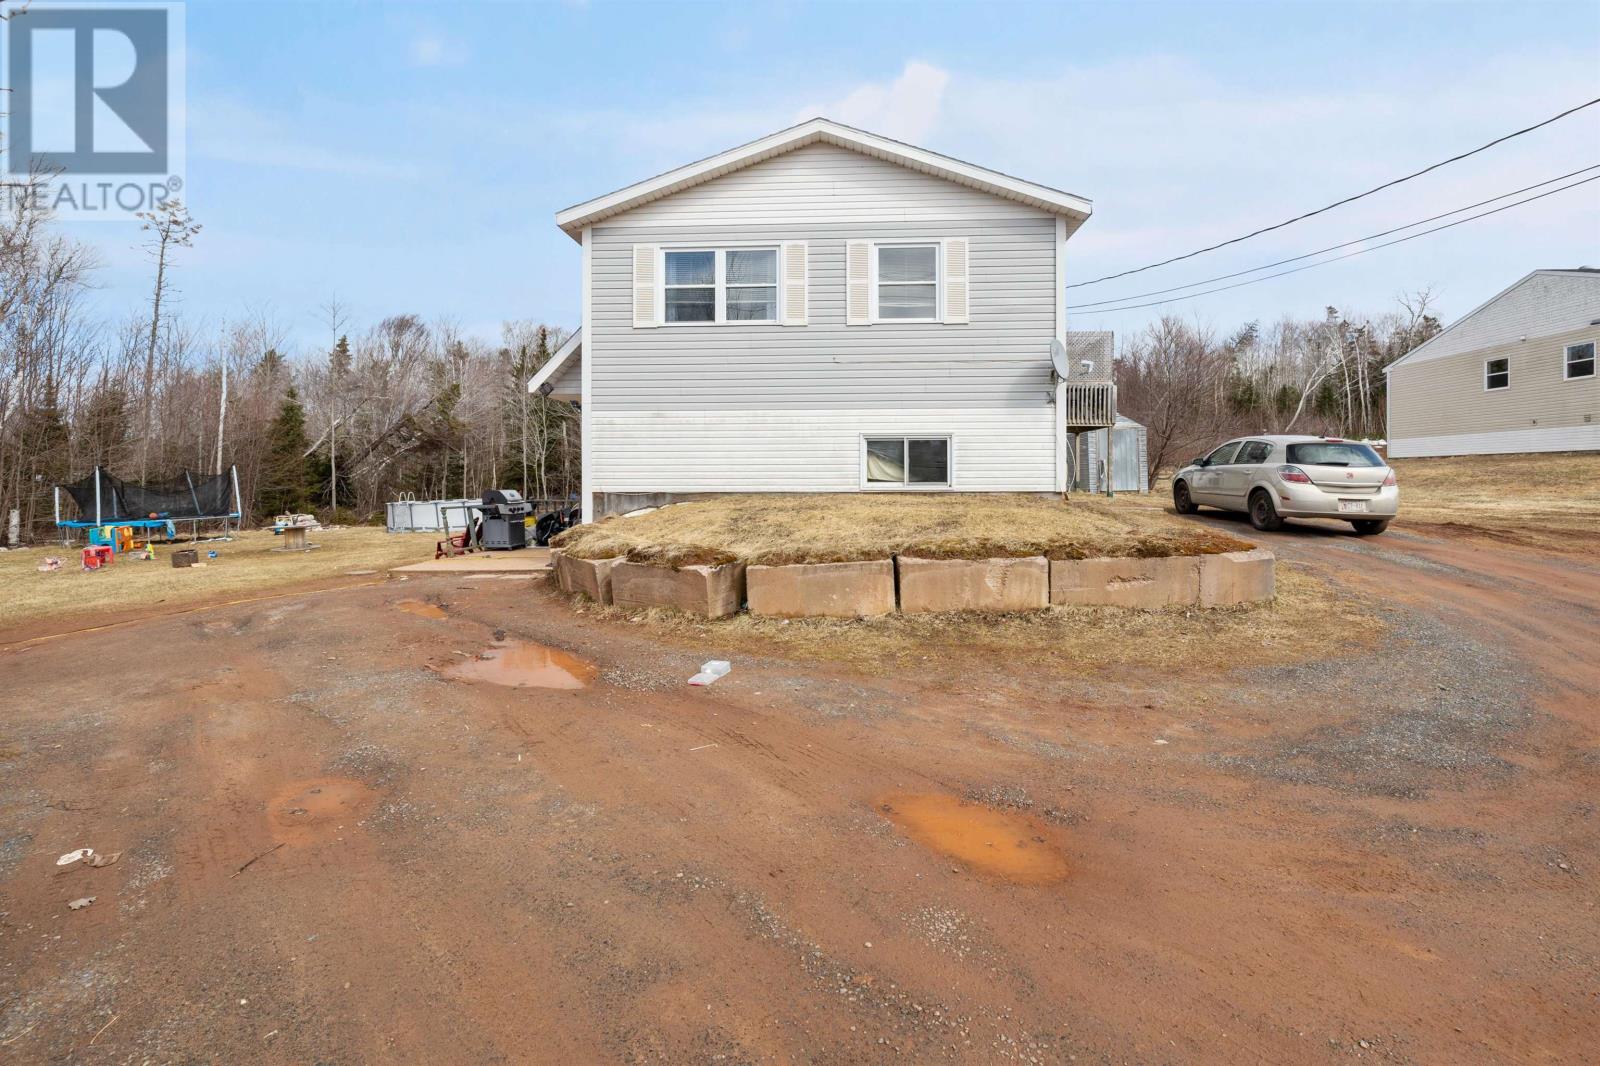 5819/5821 Campbell Road, Victoria Cross, Montague, Prince Edward Island  C0A 1R0 - Photo 3 - 202405682